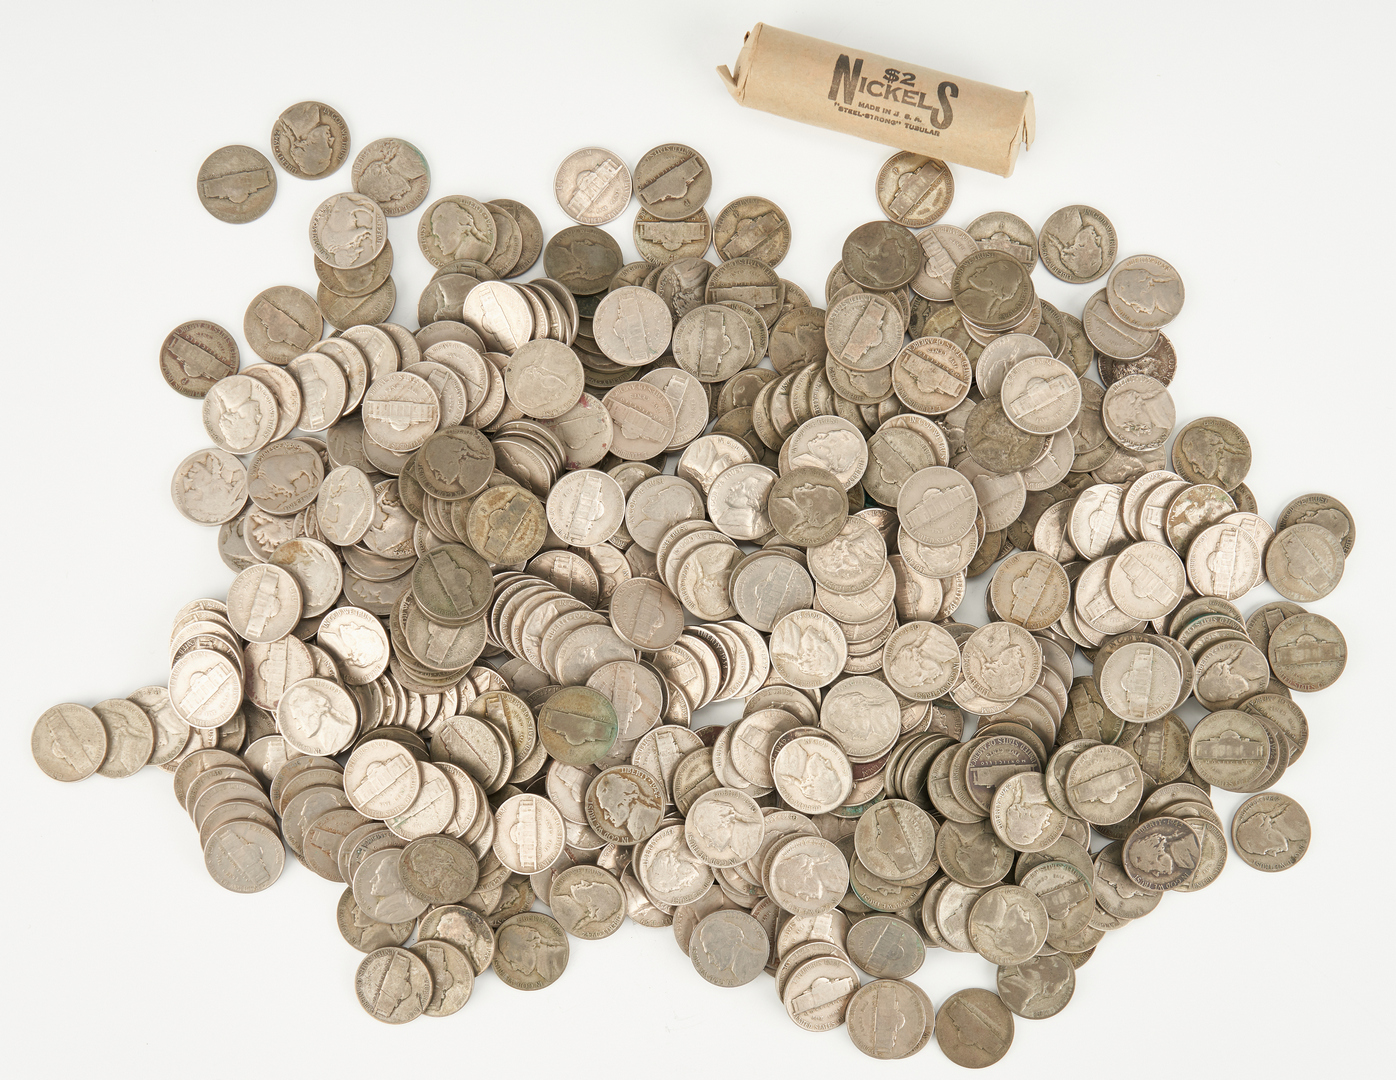 Lot 1170: 839 US Coins, incl. Susan B. Anthony, Nickels